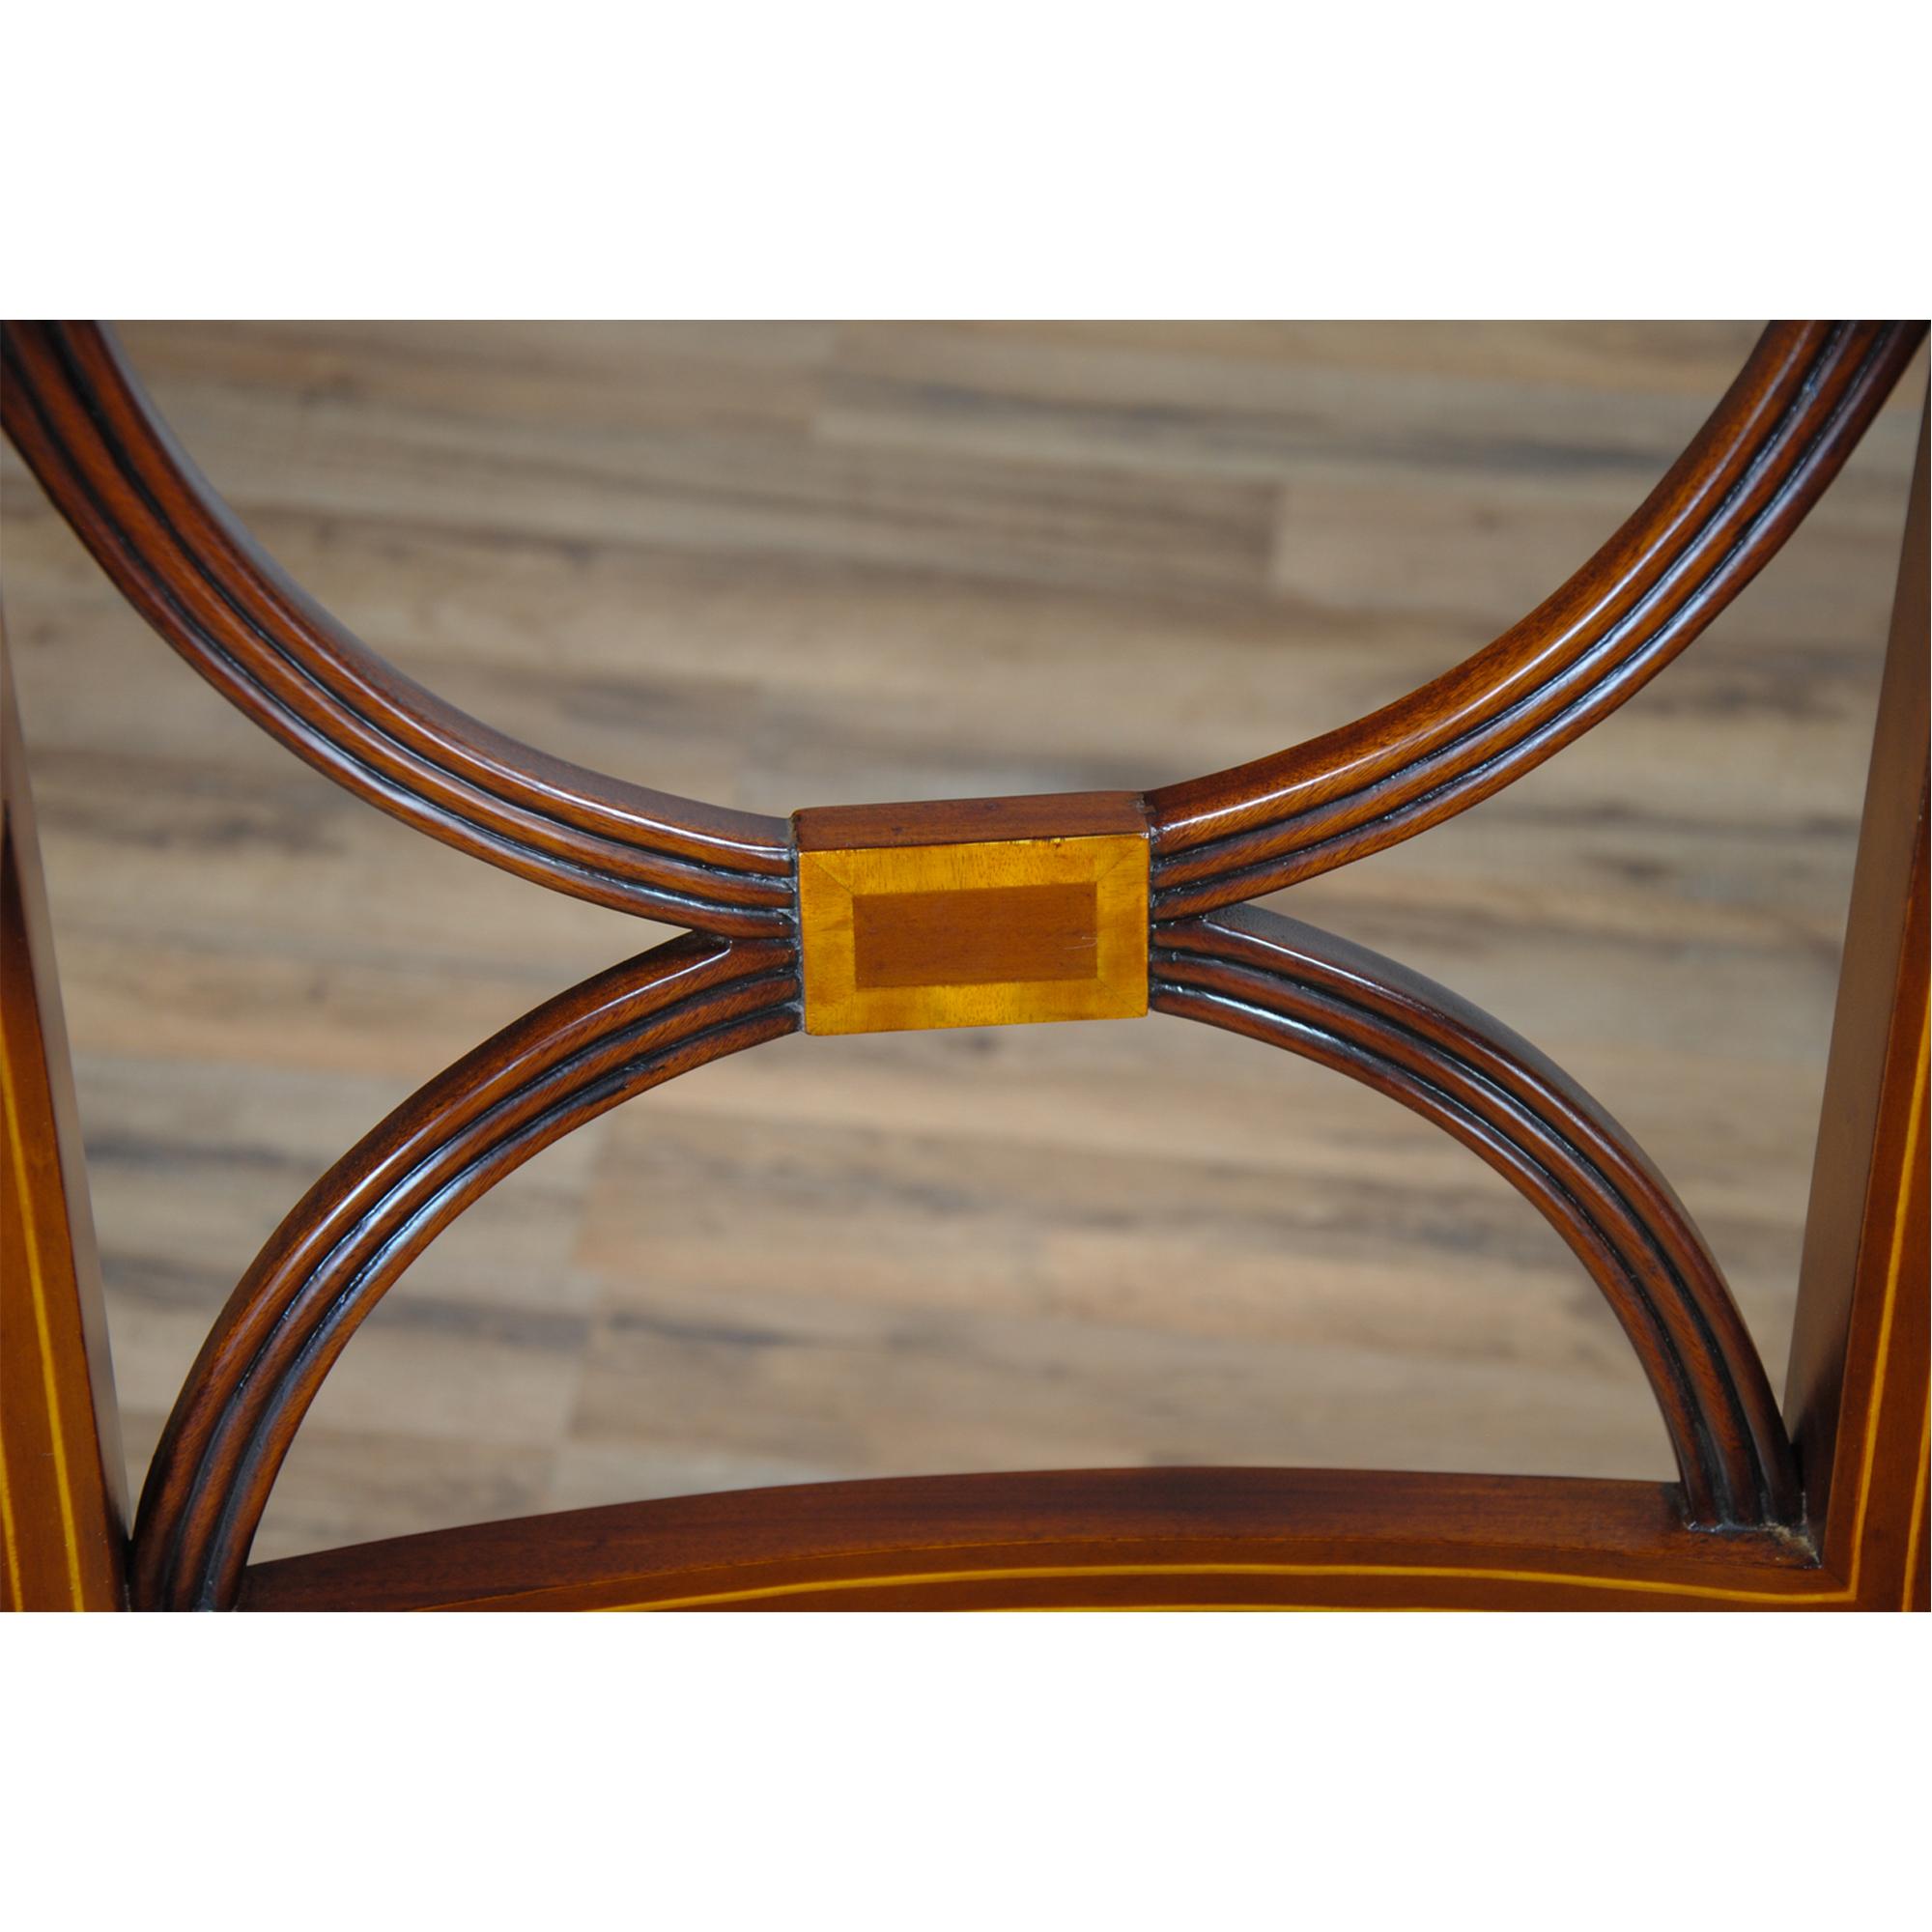 Contemporary Sheraton Inlaid Mahogany Chairs, Set of 10 For Sale